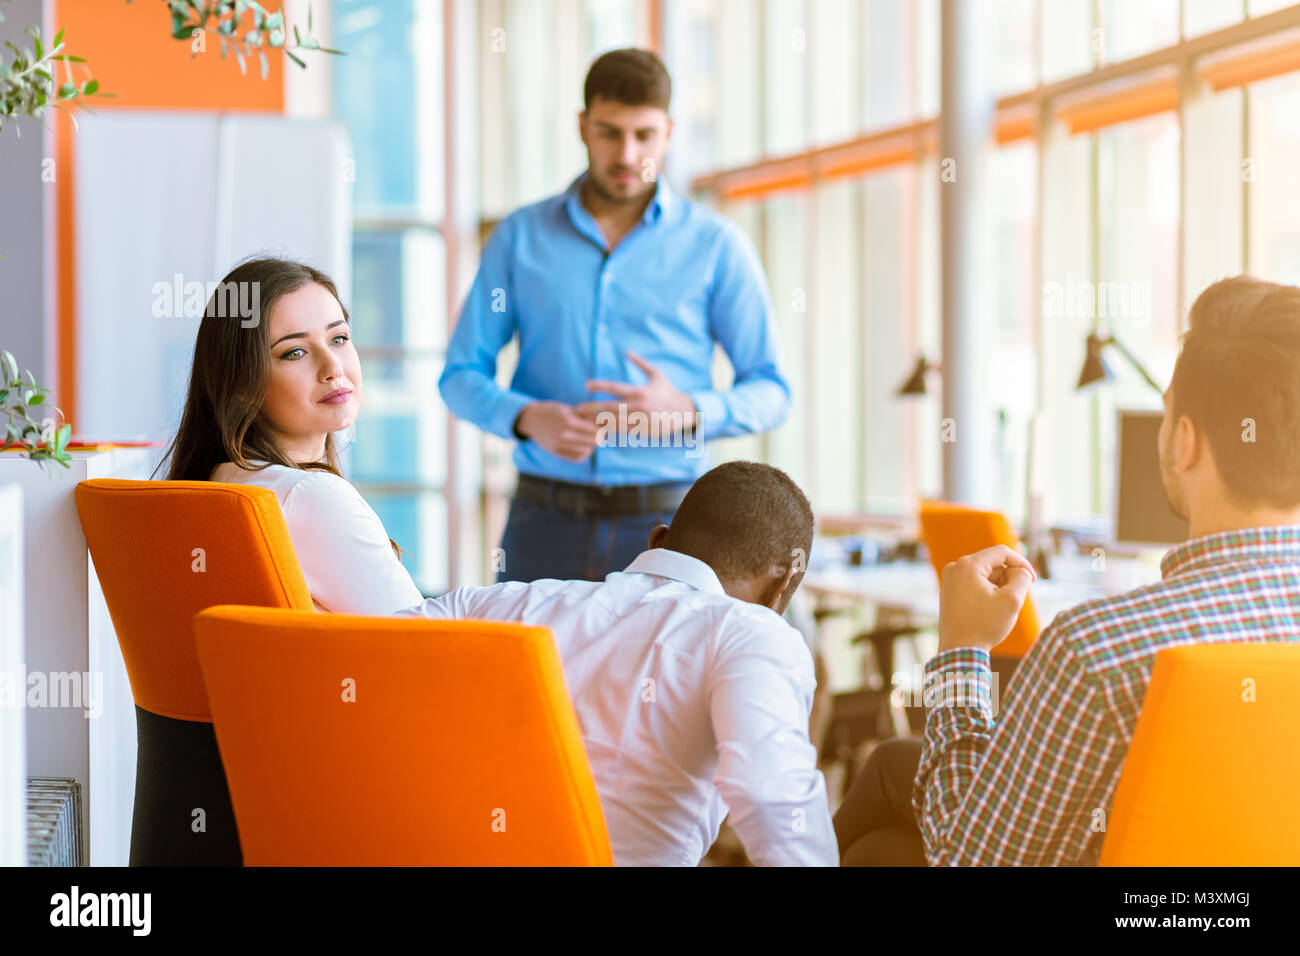 Group of casually dressed businesspeople discussing ideas in the office. Stock Photo